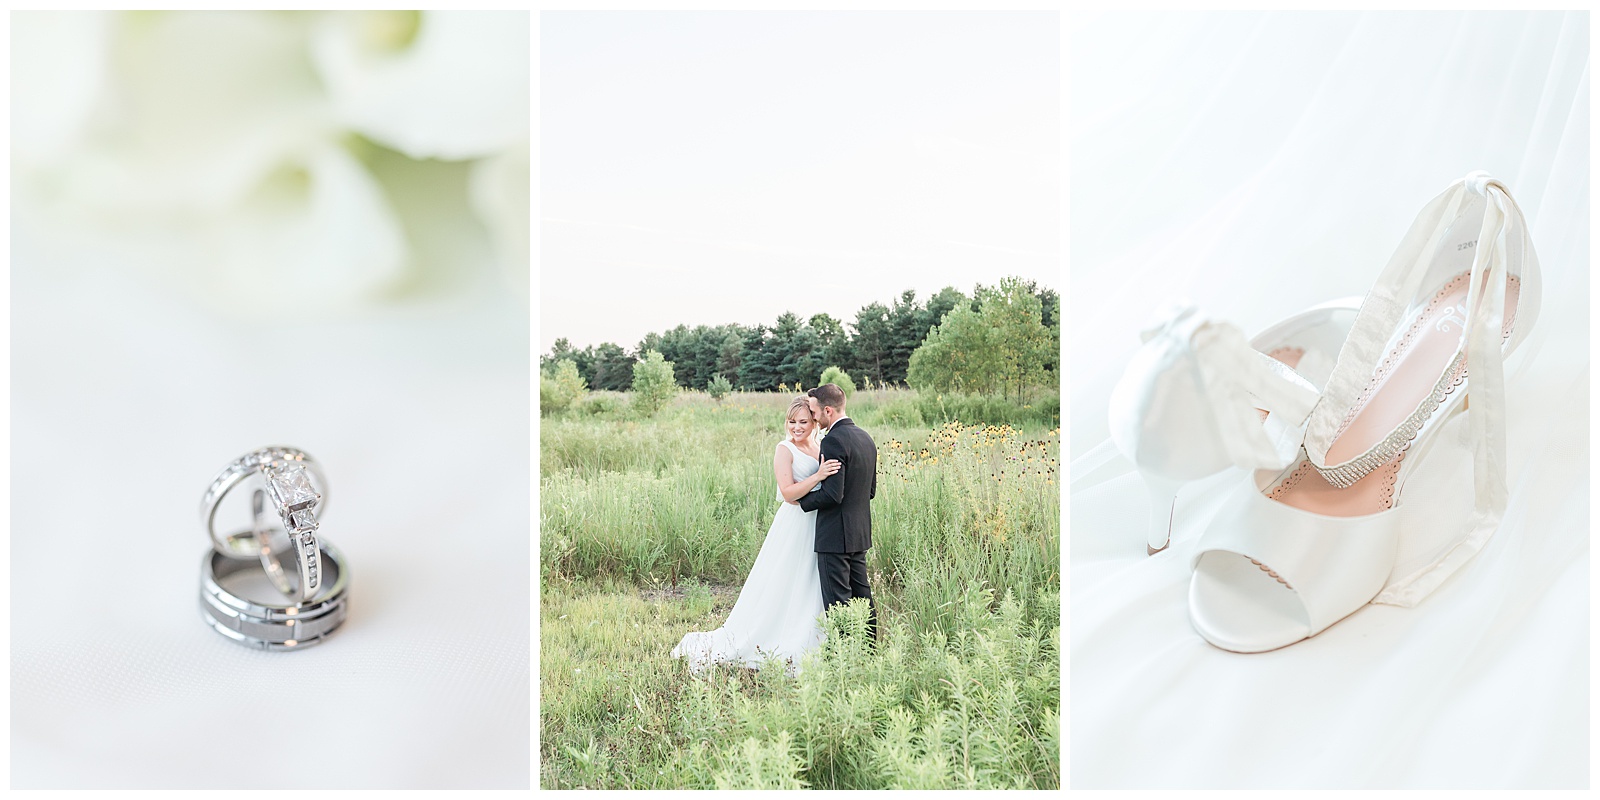 Sophisticated Air Zoo Wedding